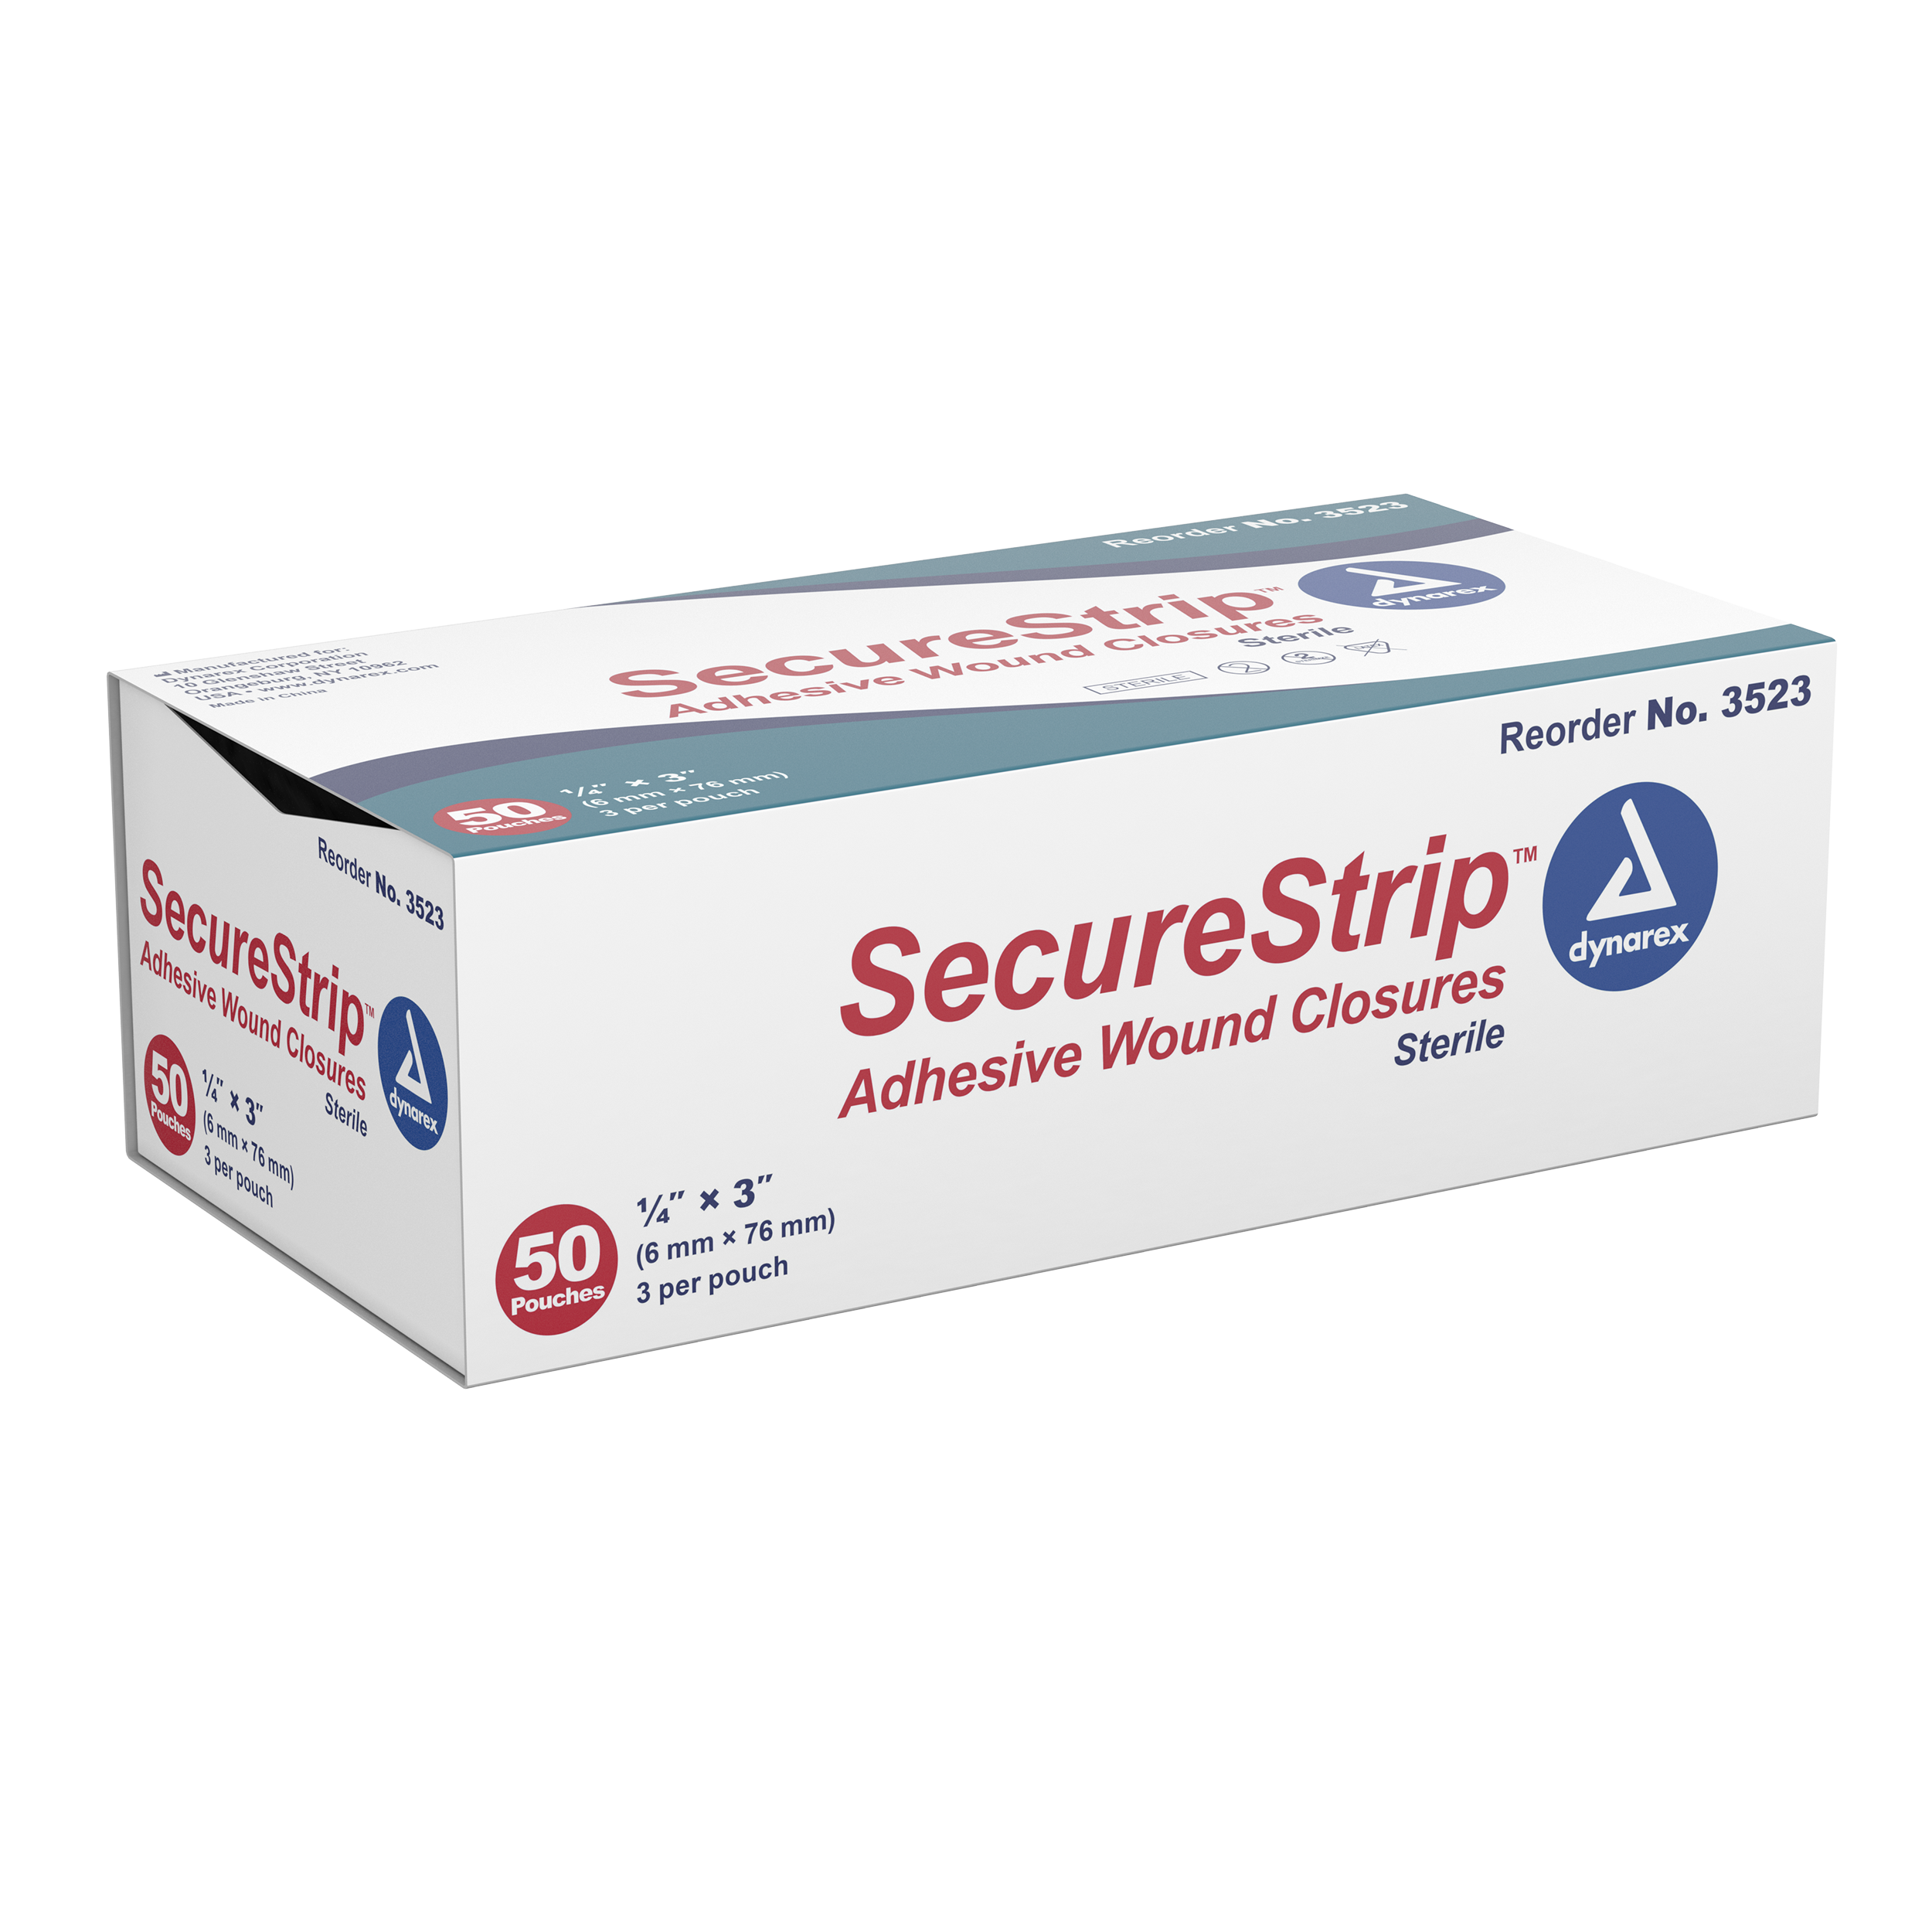 SecureStrip Adhesive Wound Closures - 1/4in x 3in Sterile